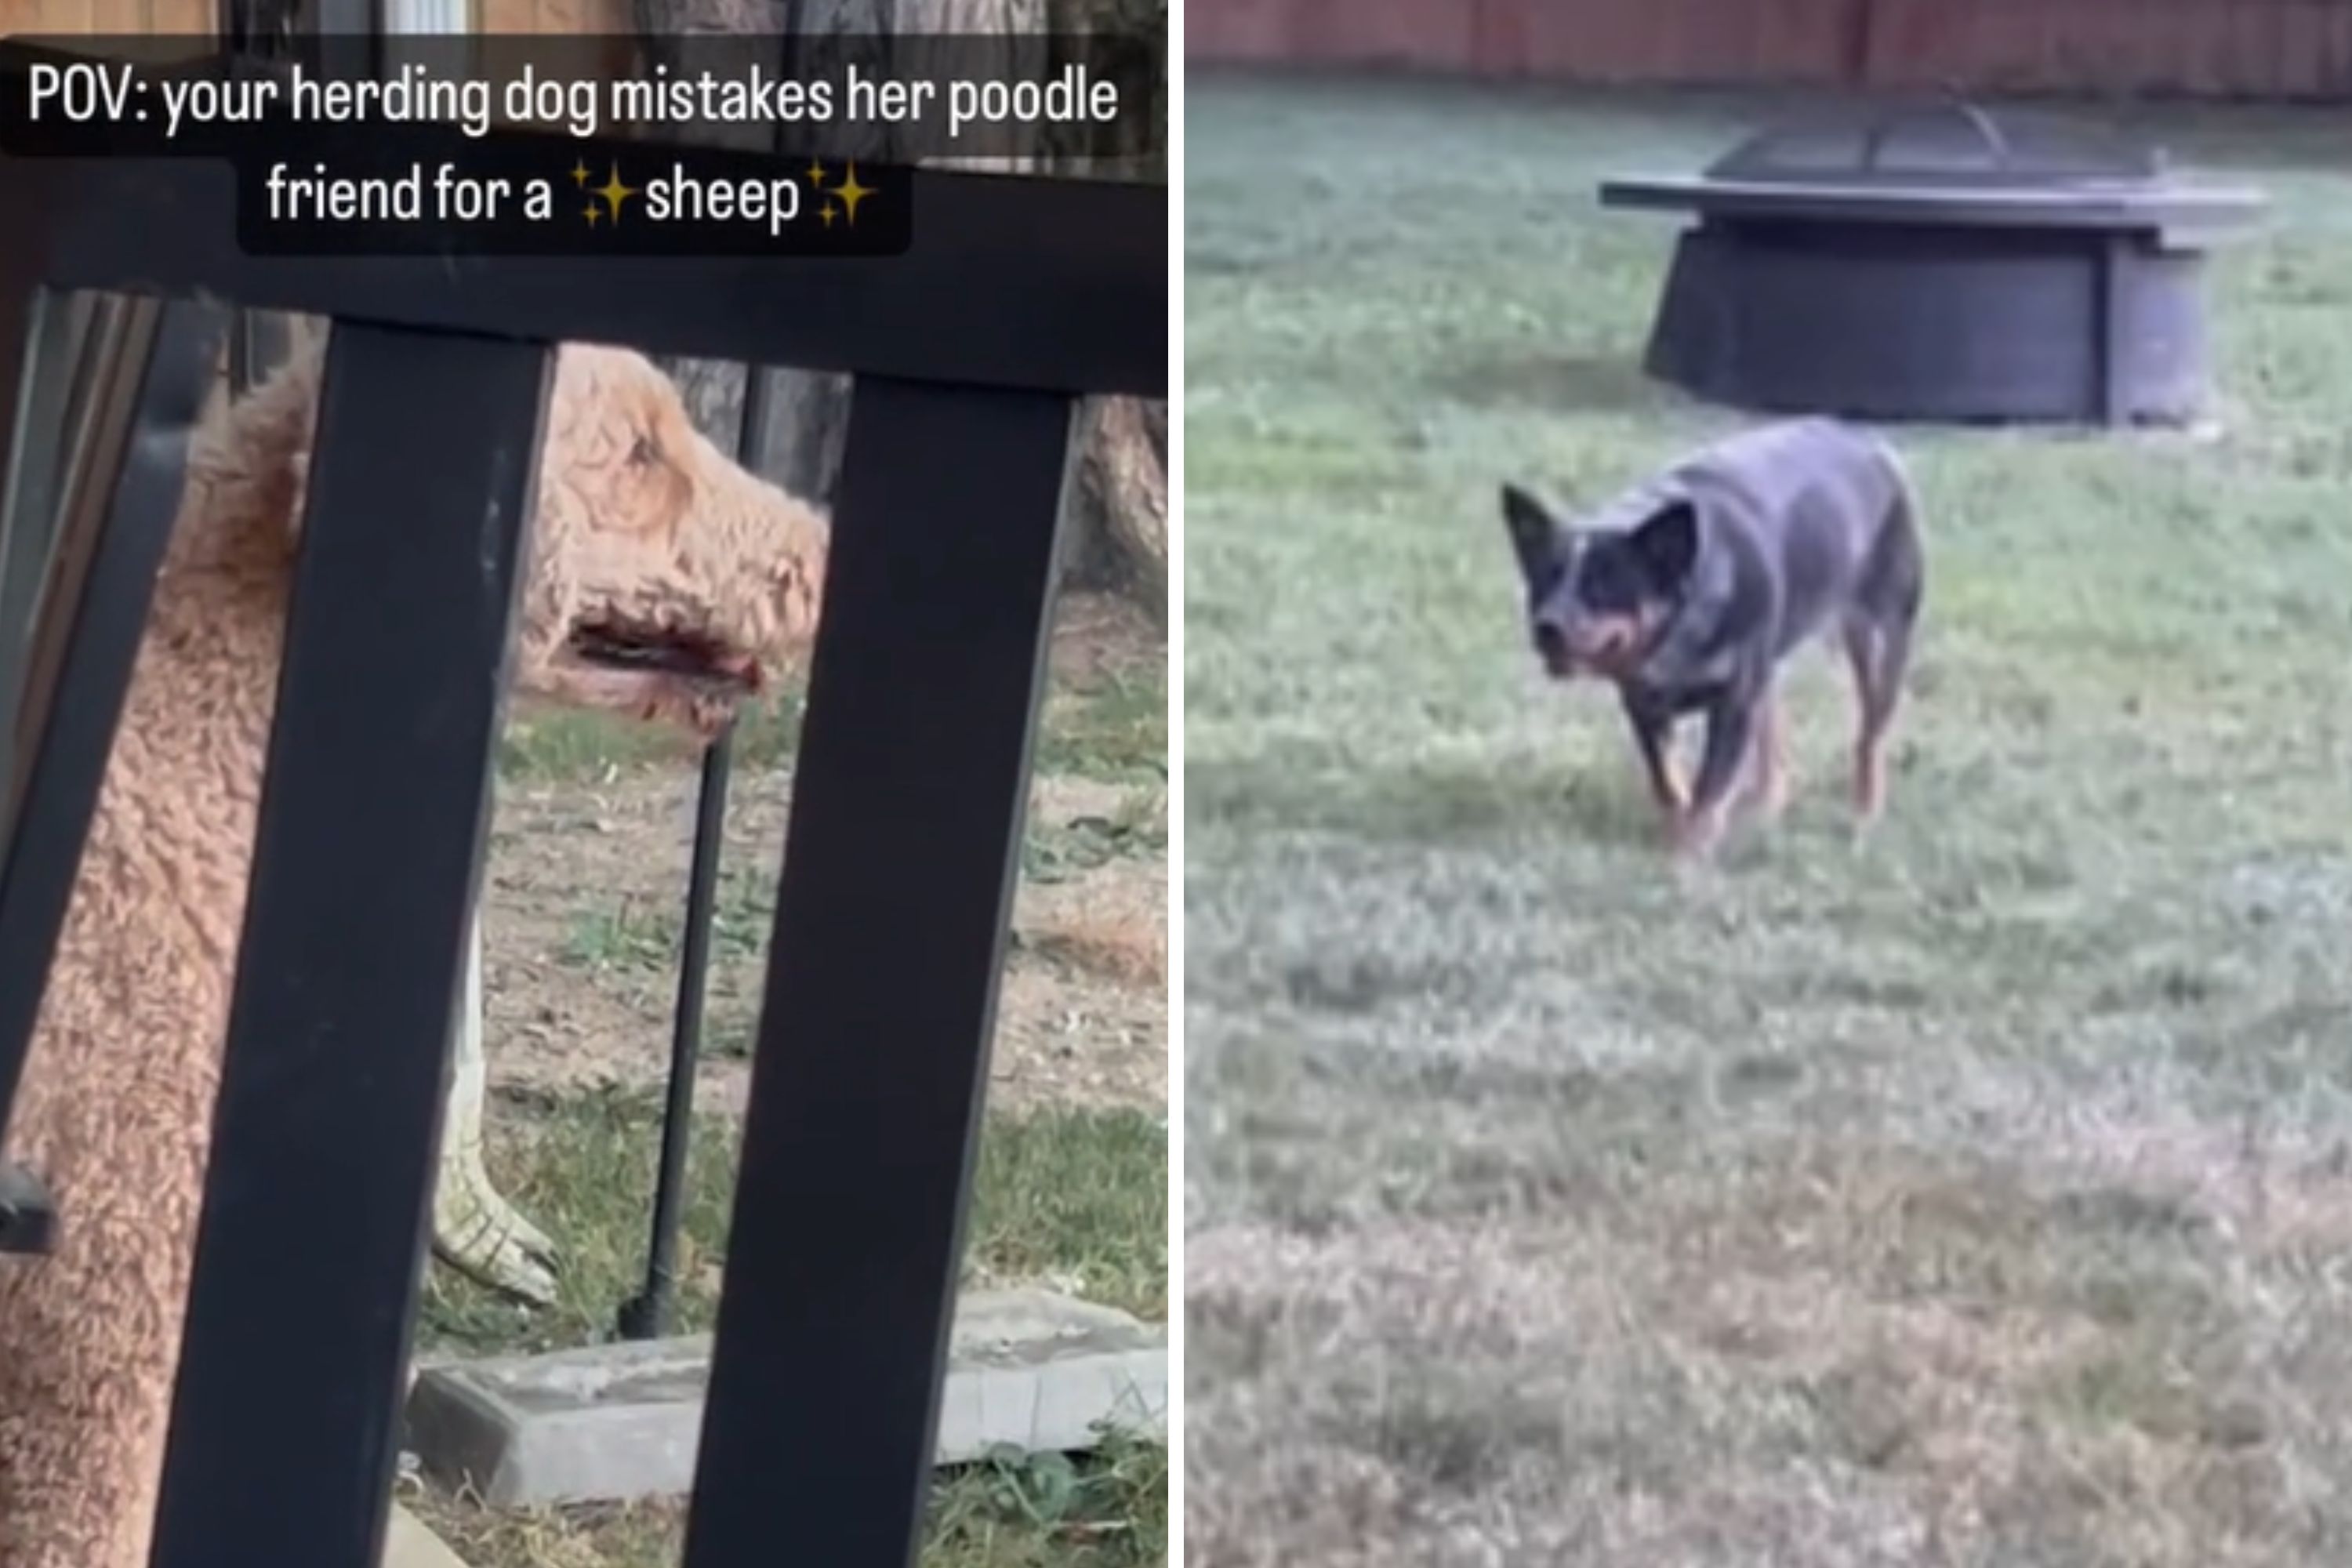 Herding dog mistakes poodle for a sheep, instincts immediately kick in